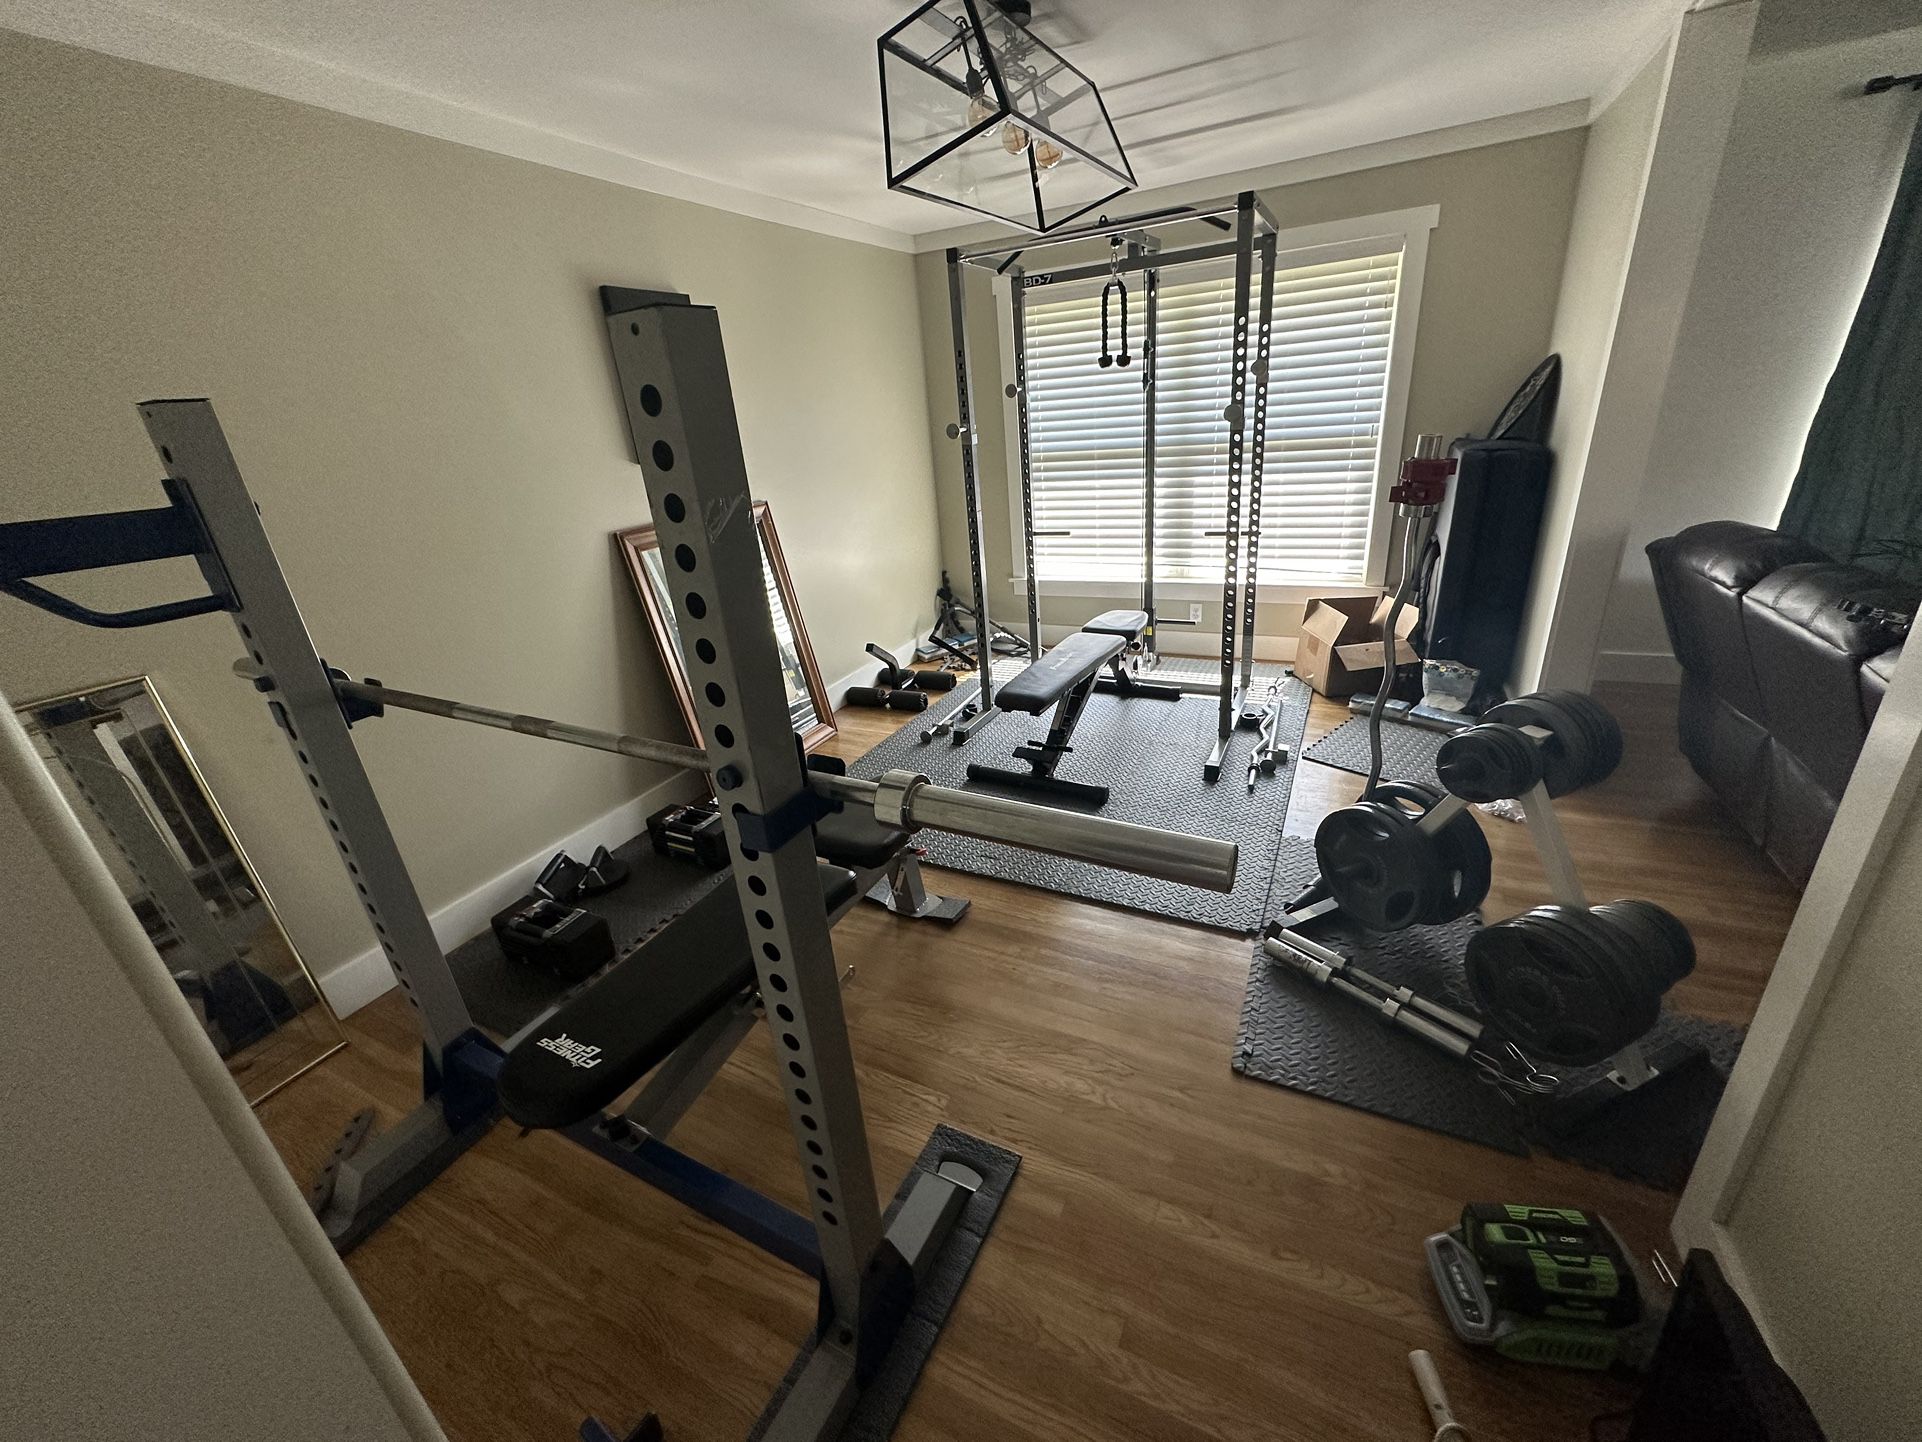 Weights / Home Gym